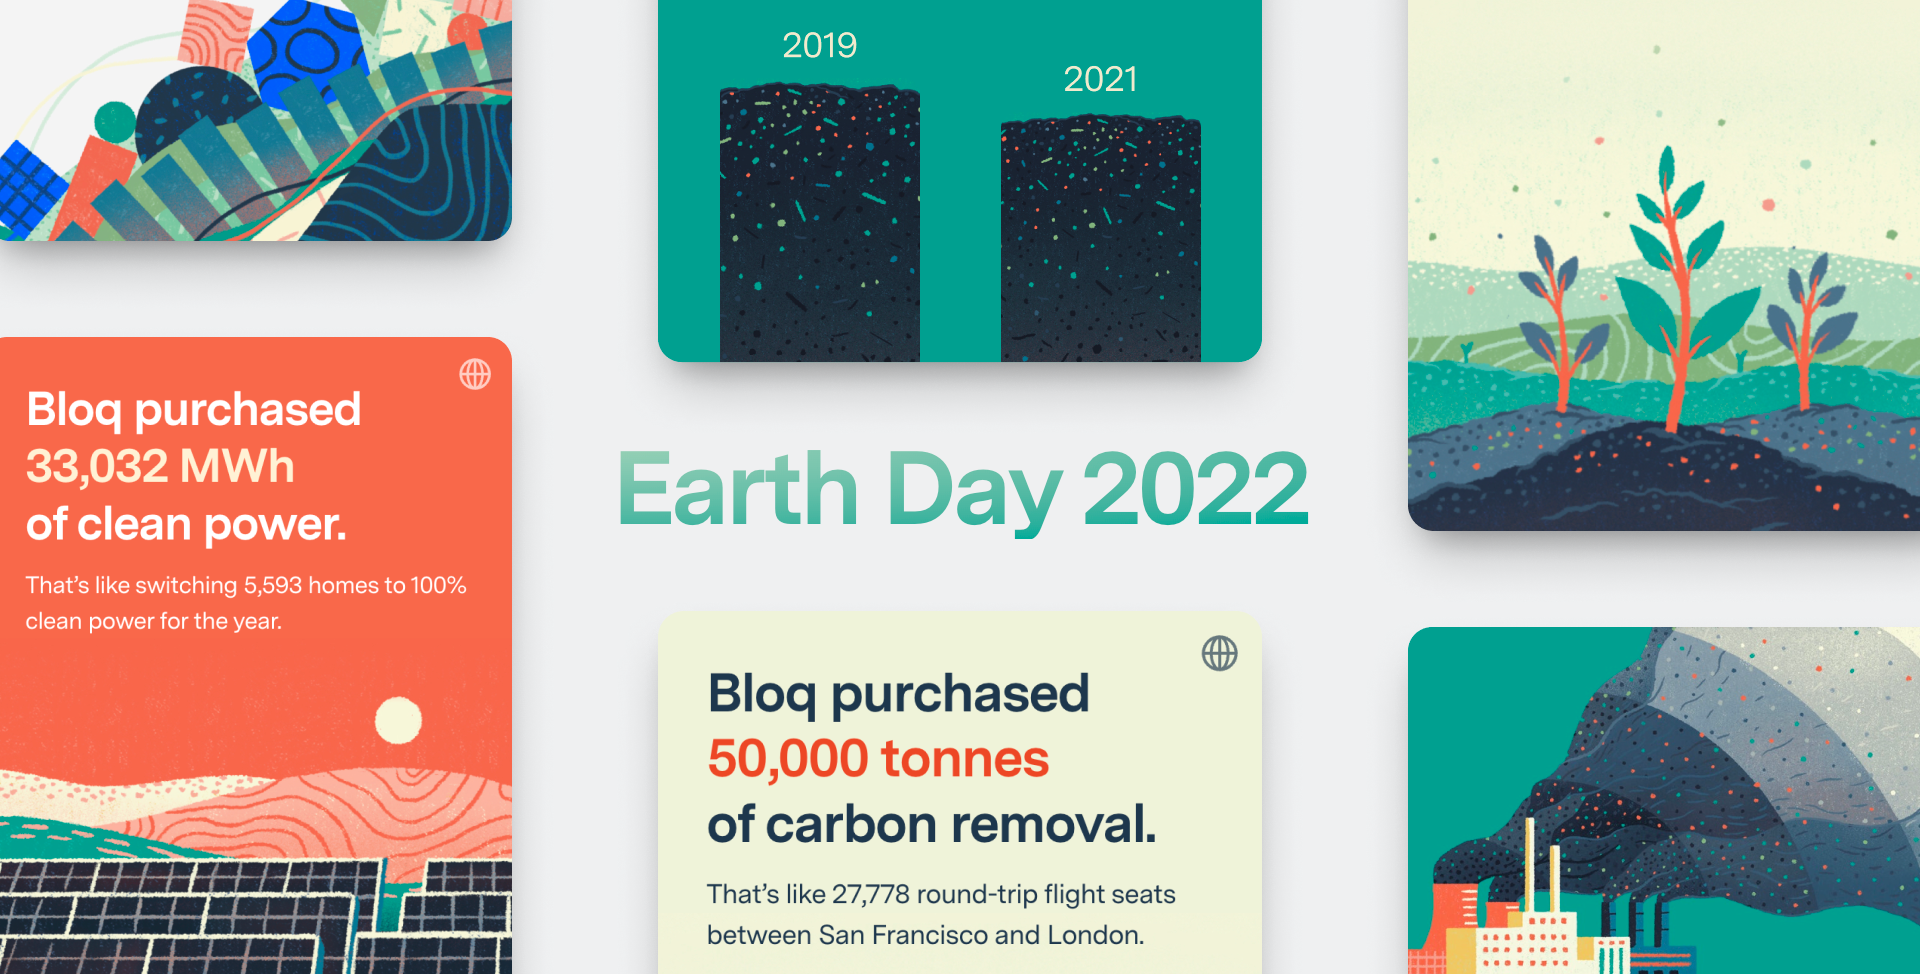 Hero illustration of “Earth Day 2022” in green with an array of cards of climate-related illustrations